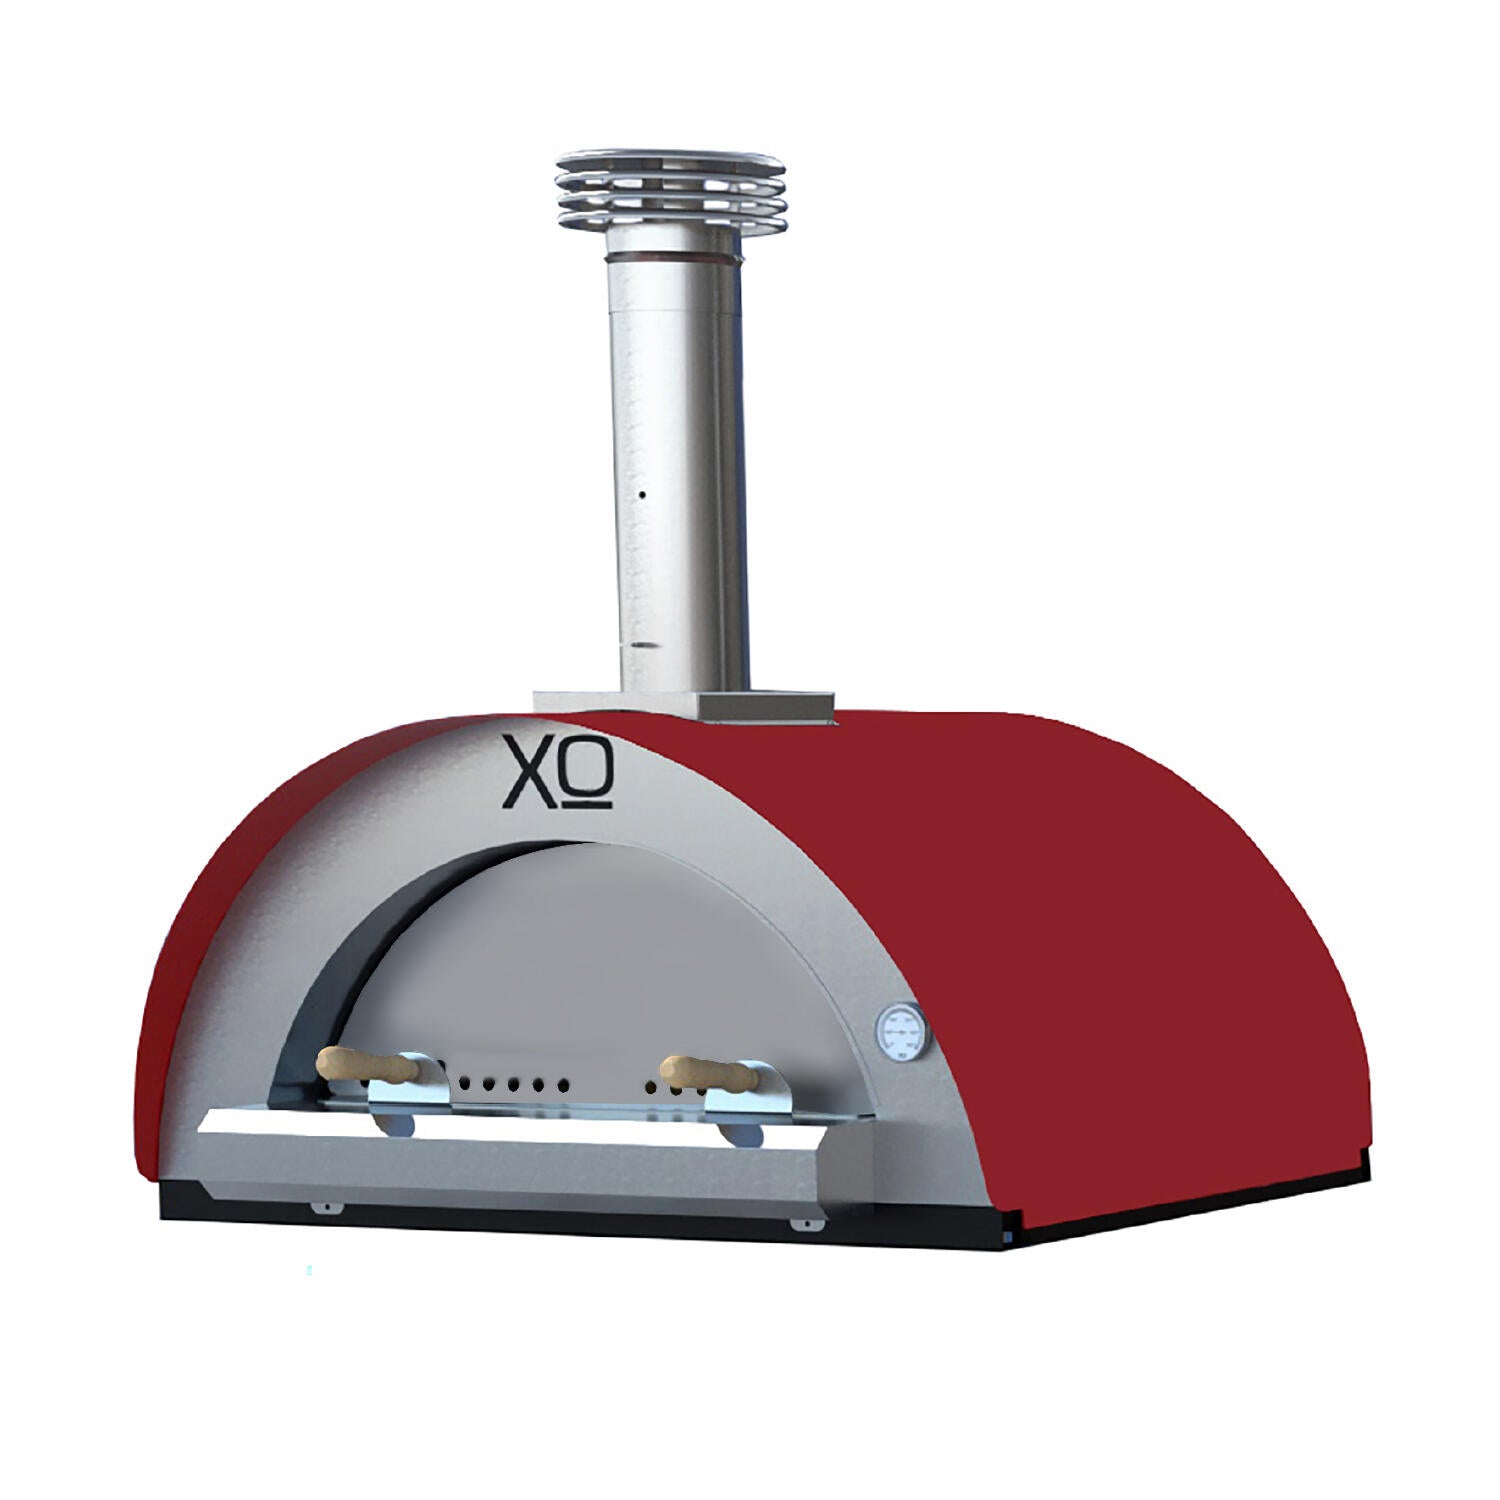 Xo Appliance XOPIZZA4RO 40In Wood Fired Pizza Oven Rosso (Red)